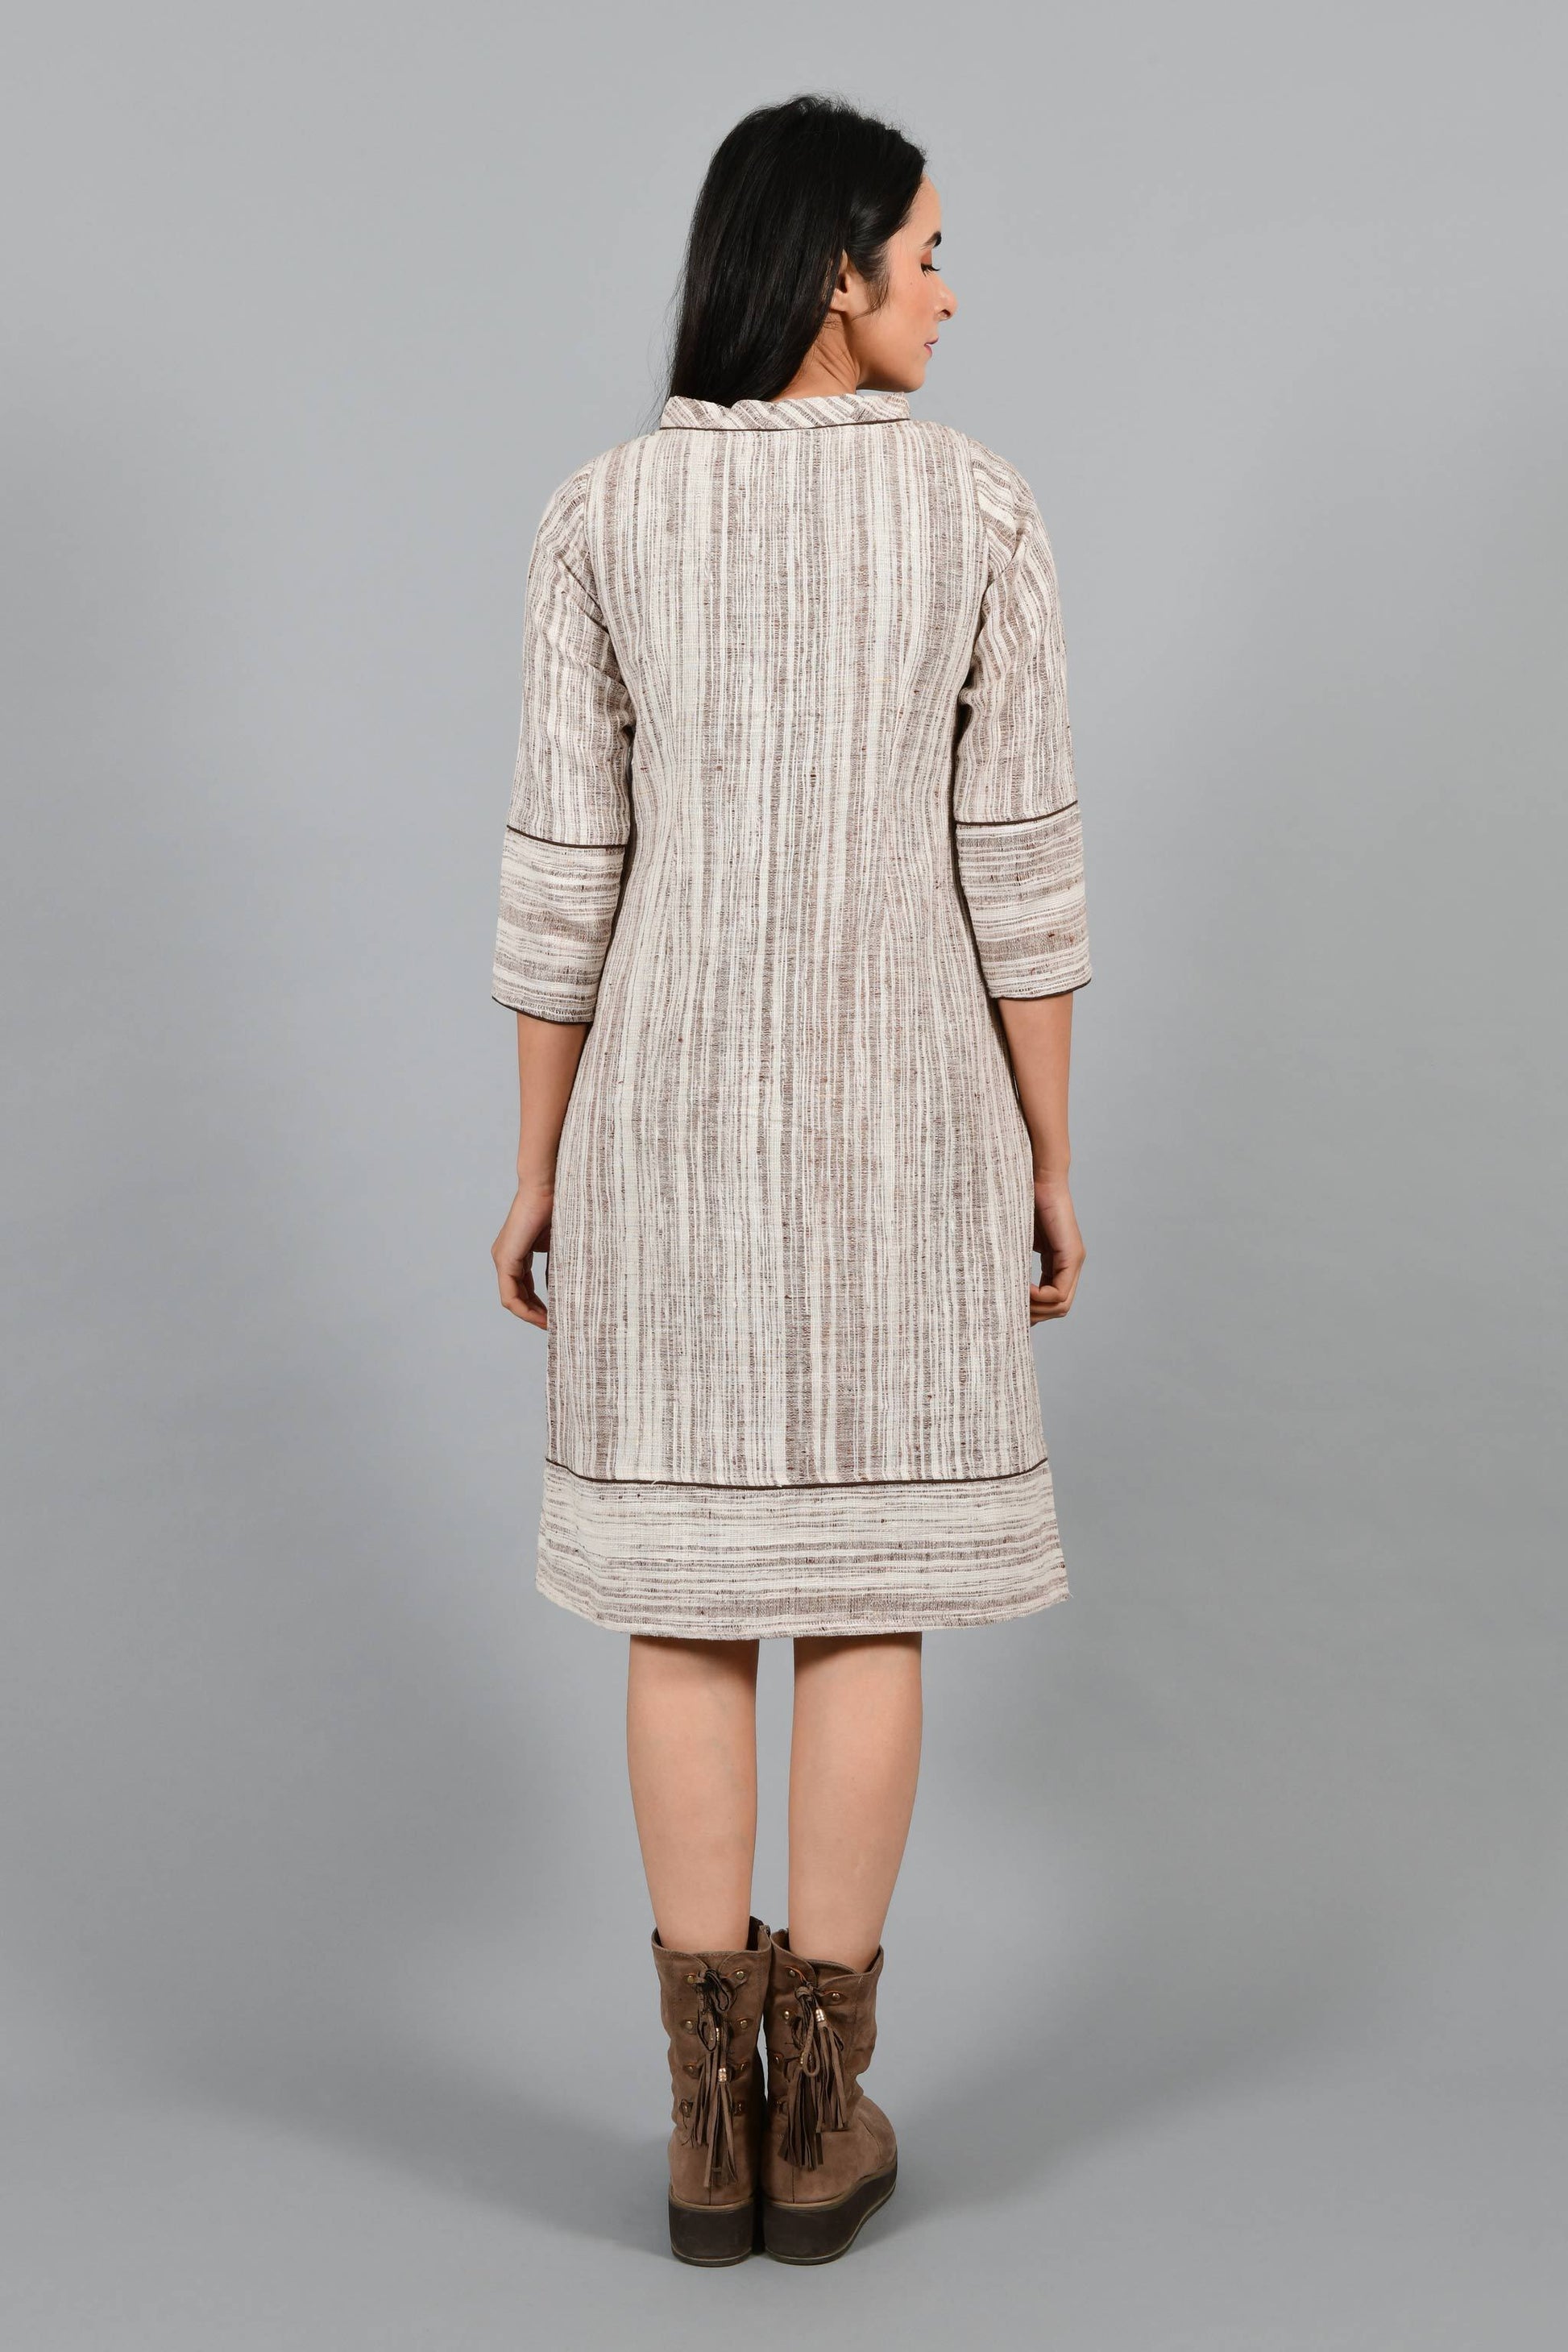 Back pose of an Indian Womenswear female model wearing brown handspun and handwoven cotton a-line dress by Cotton Rack.